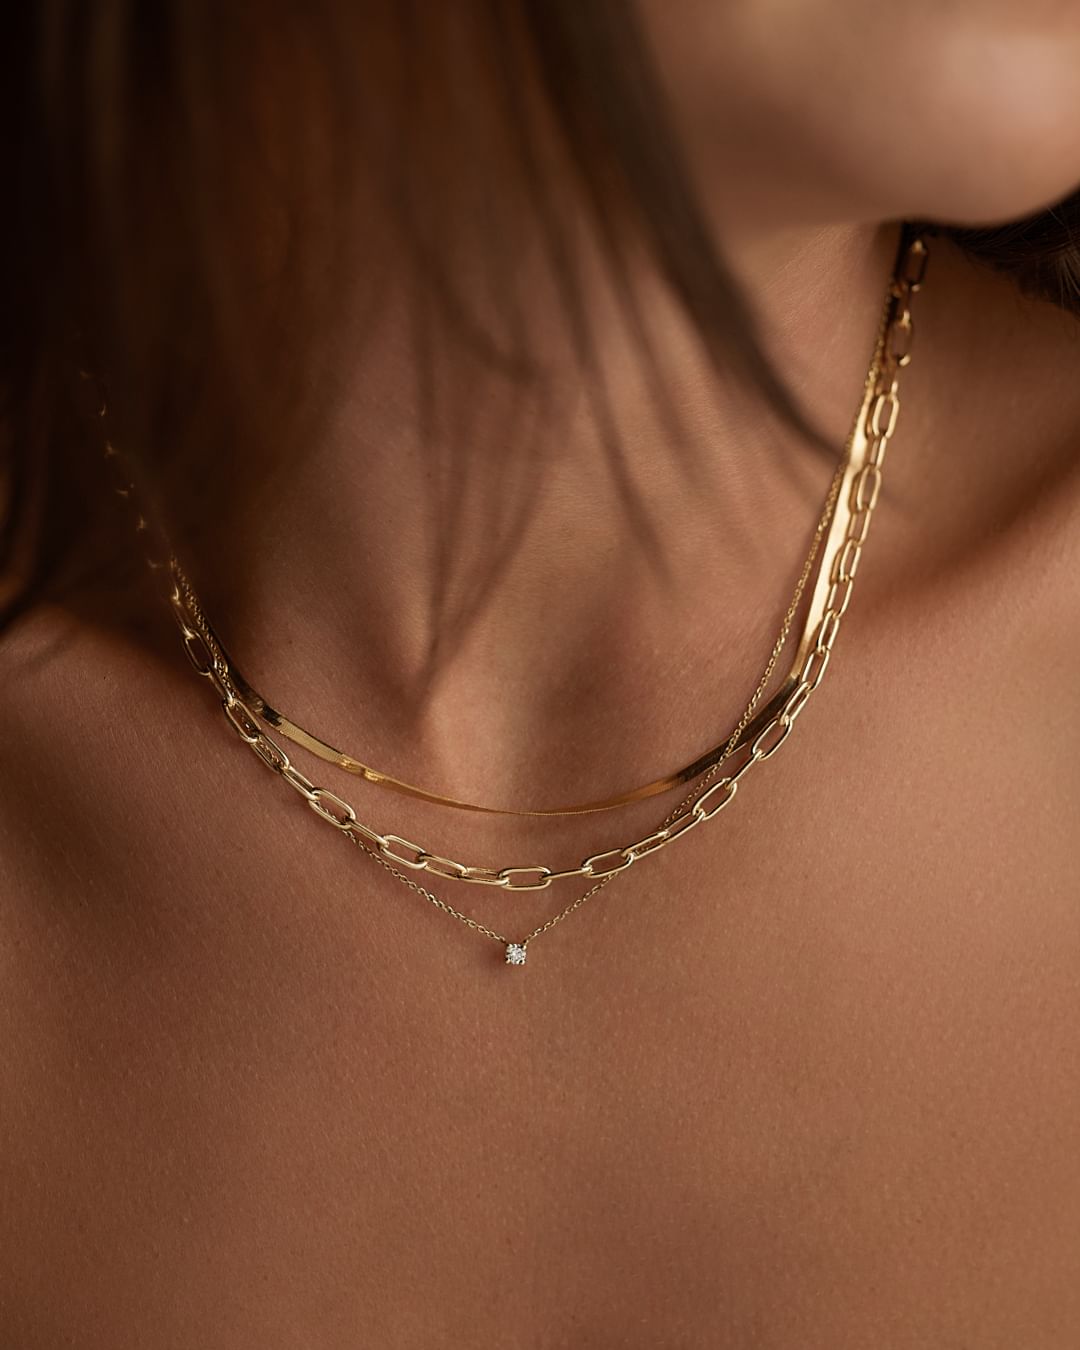 close-up image of model wearing layered gold necklaces